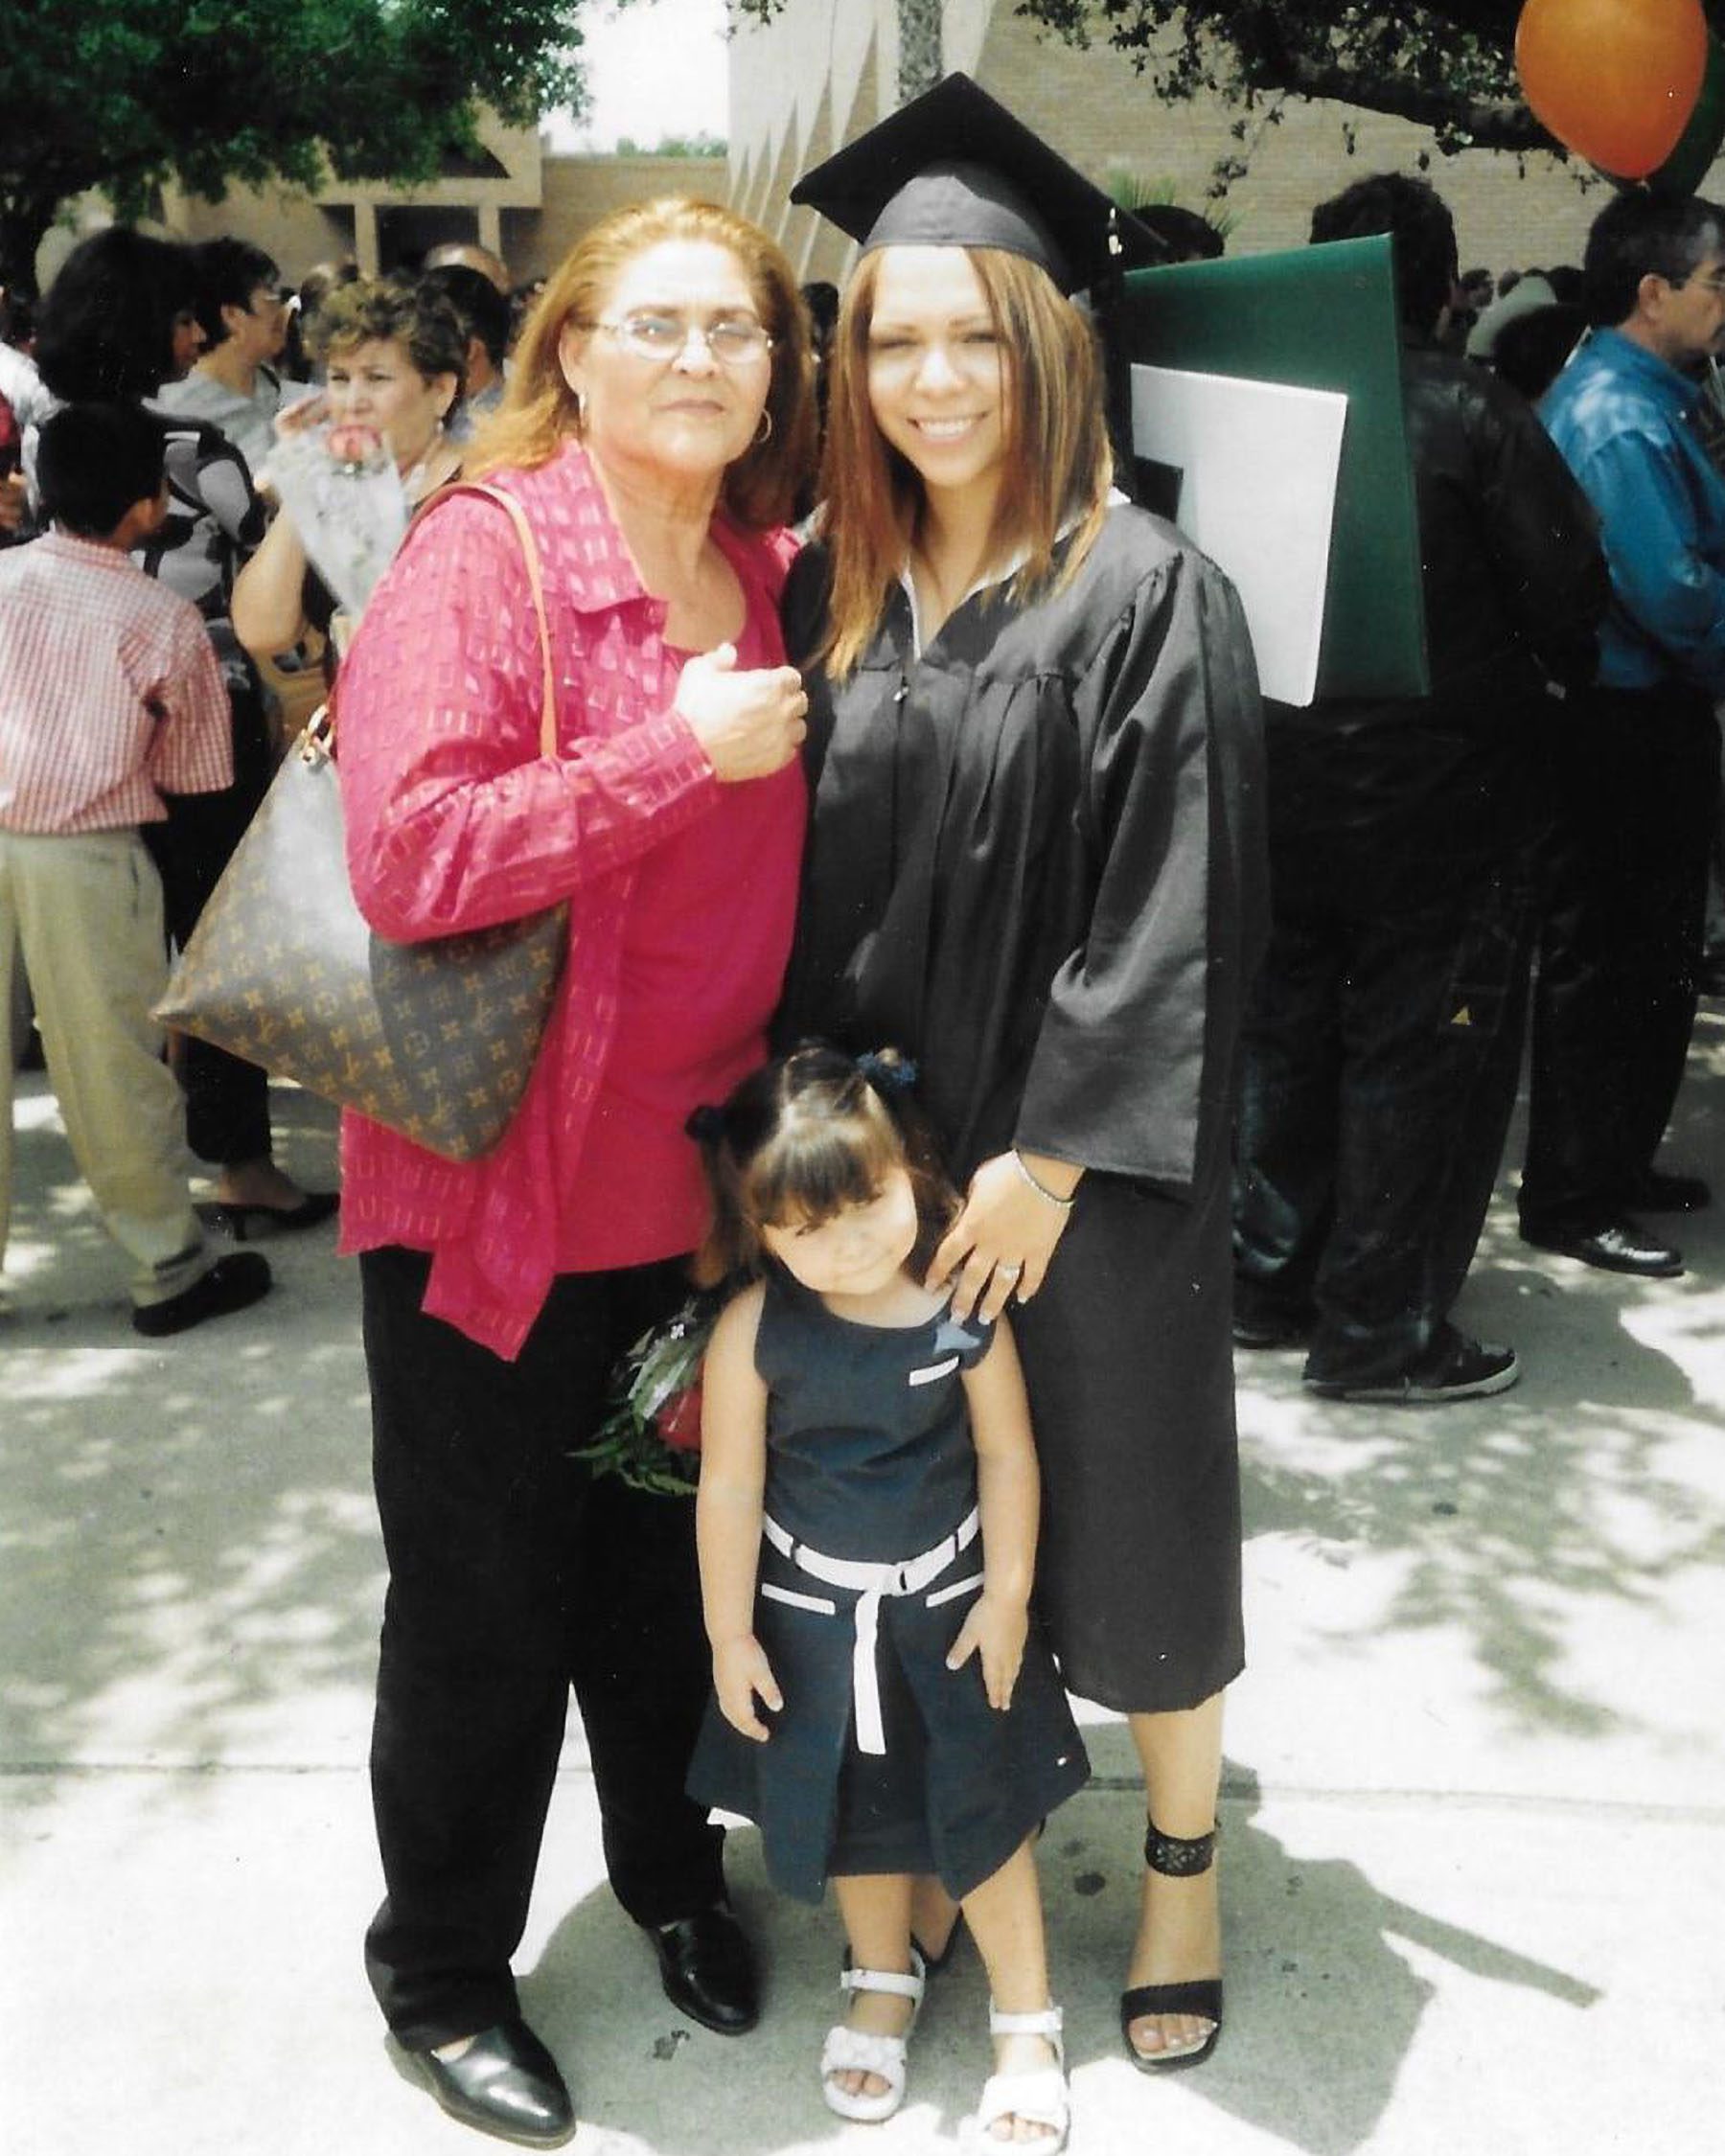 Jacqueline as a child poses with her mother and grandmother at her mother's graduation.